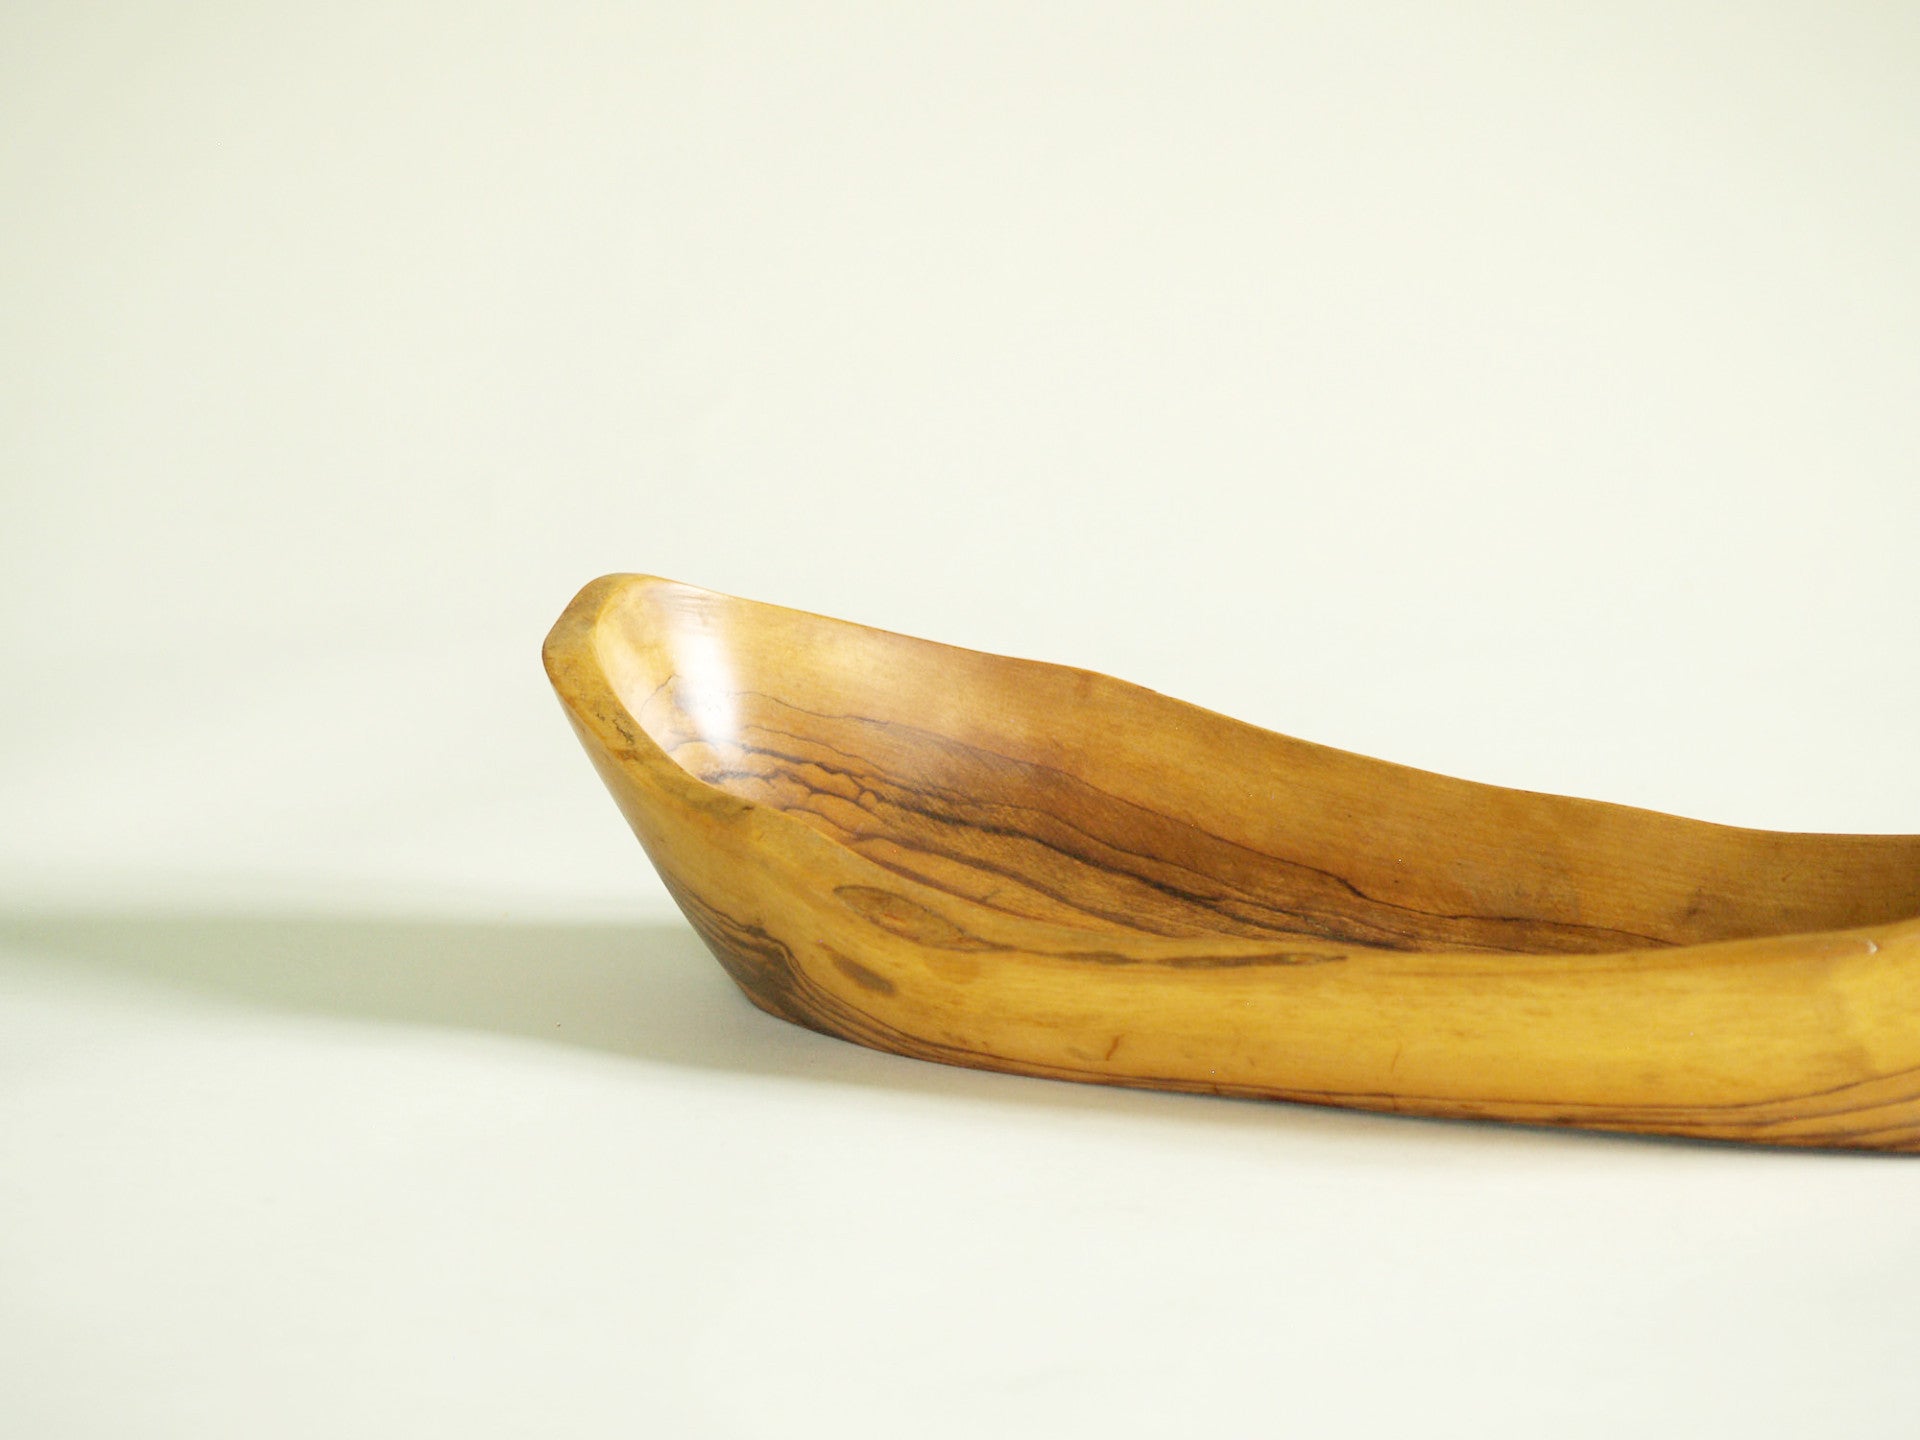 Coupe monoxyle de forme navette, France (vers 1950)..boat-shaped carved bowl, France (circa 1950)